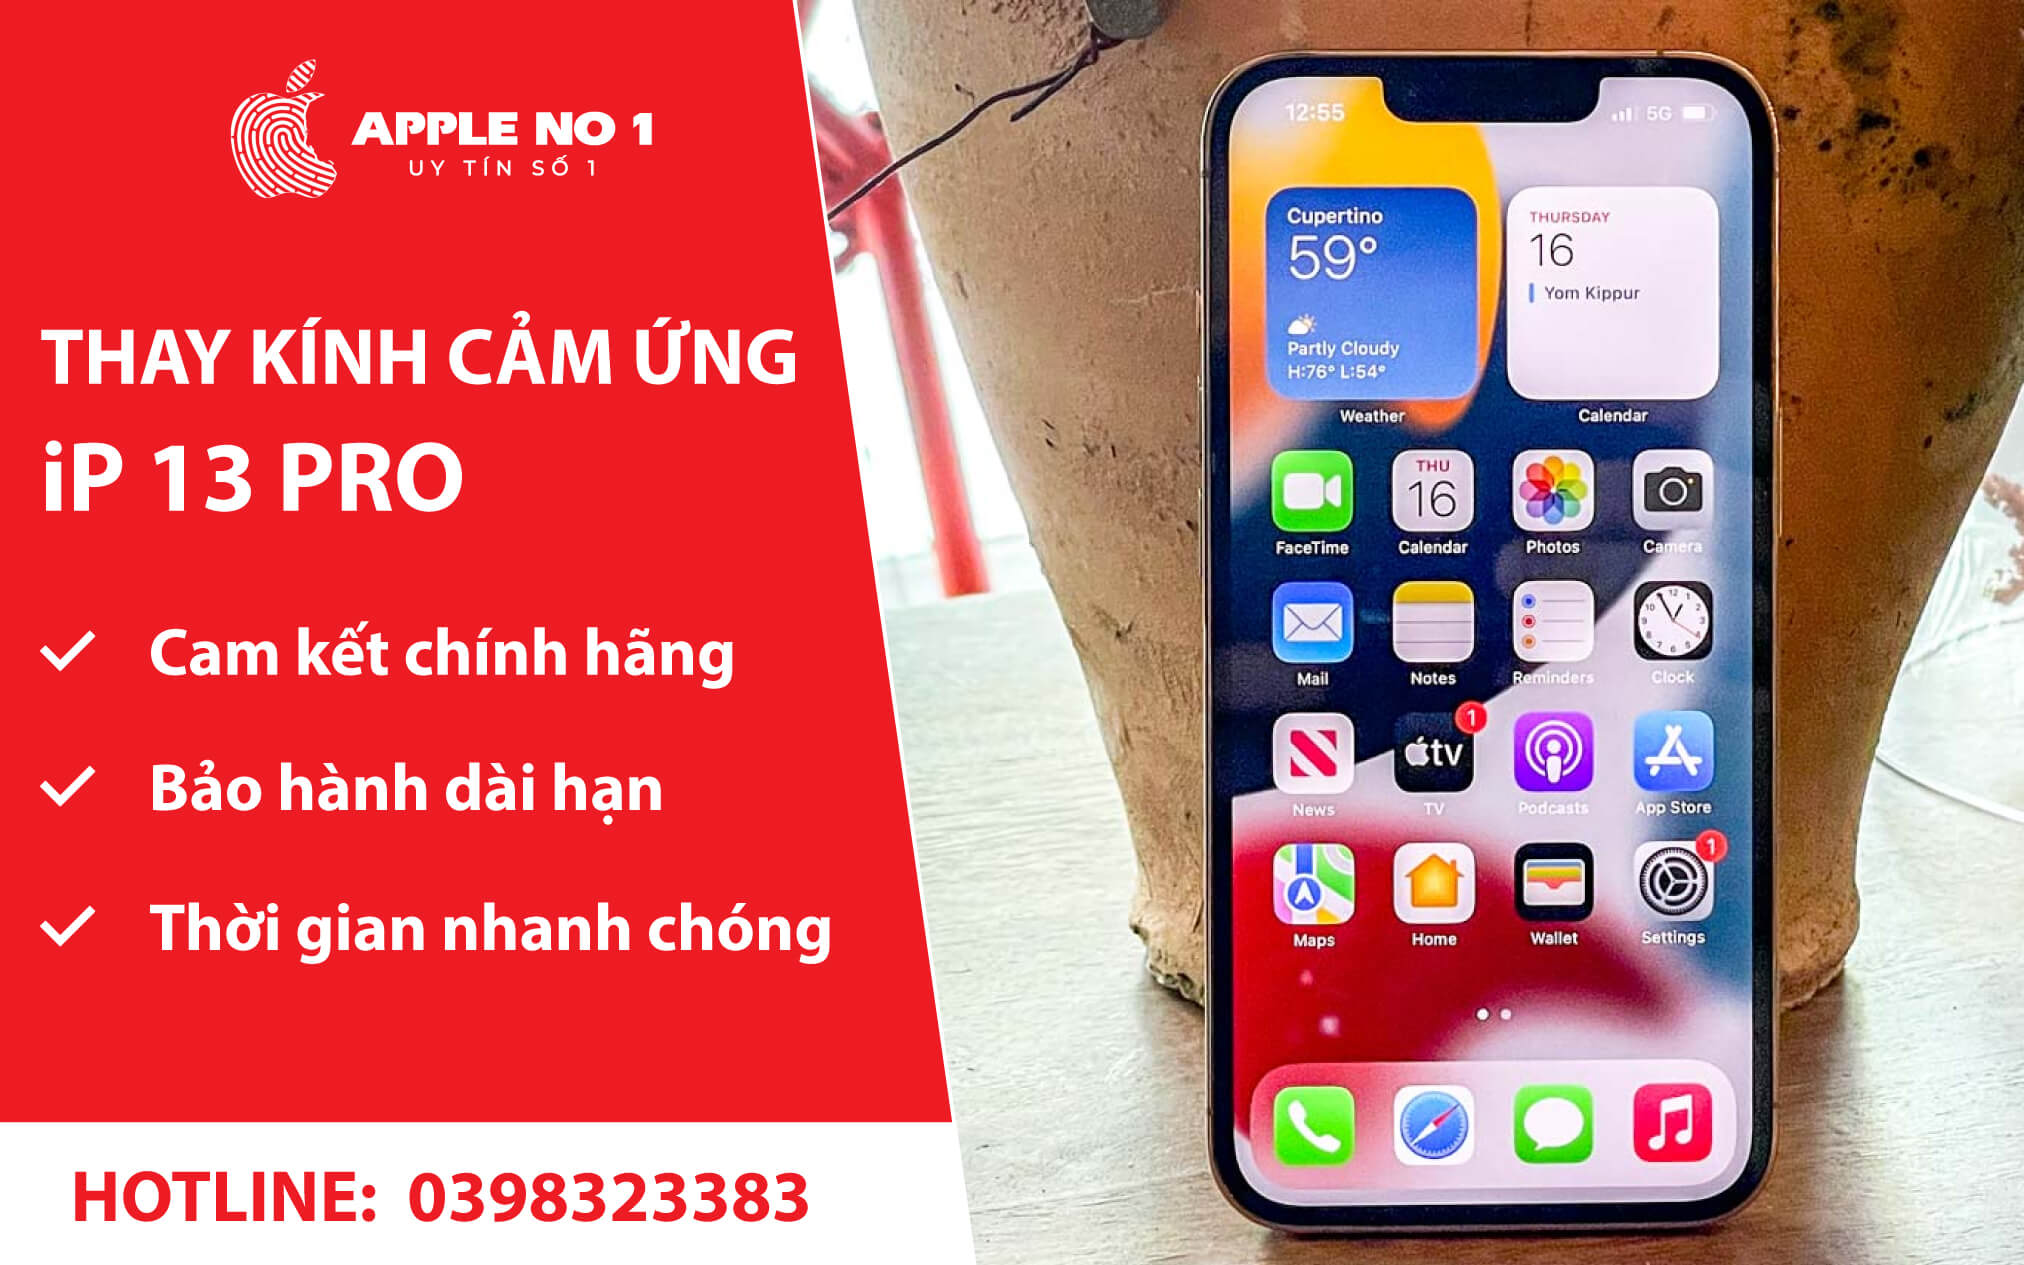 dich vu thay kinh cam ung iphone 13 pro lay ngay, gia tot tai appleno1.vn